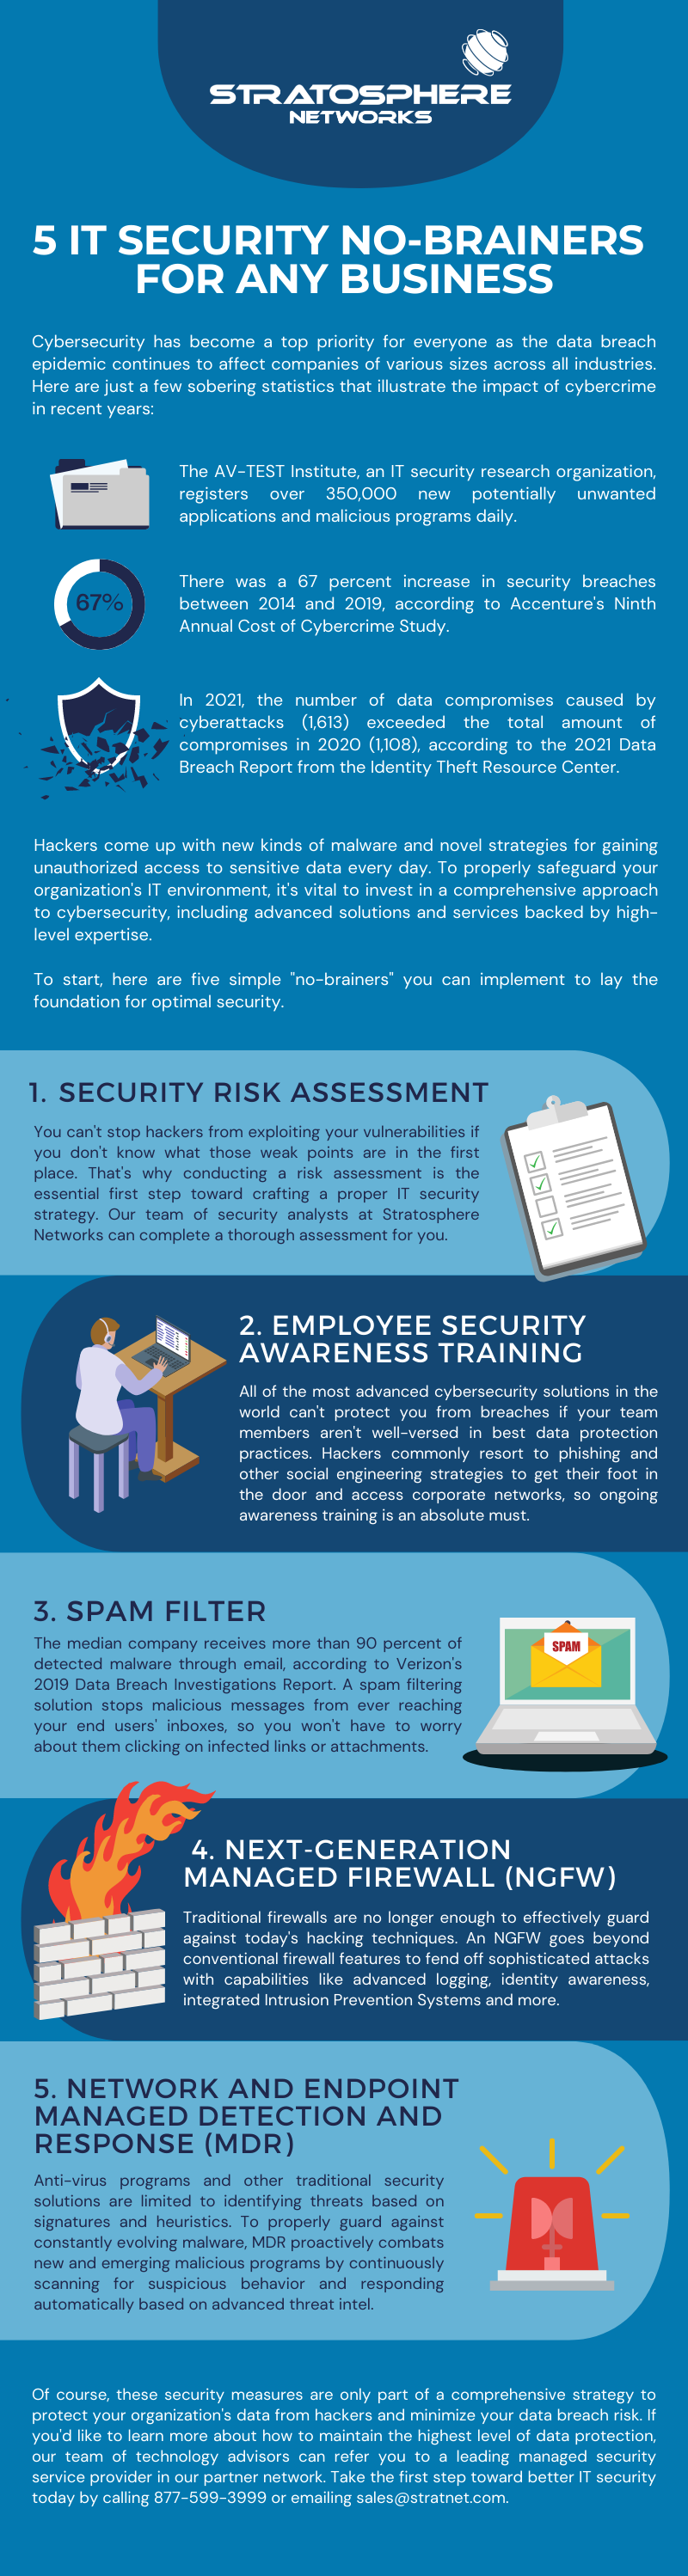 5 IT Security No-Brainers for Any Business